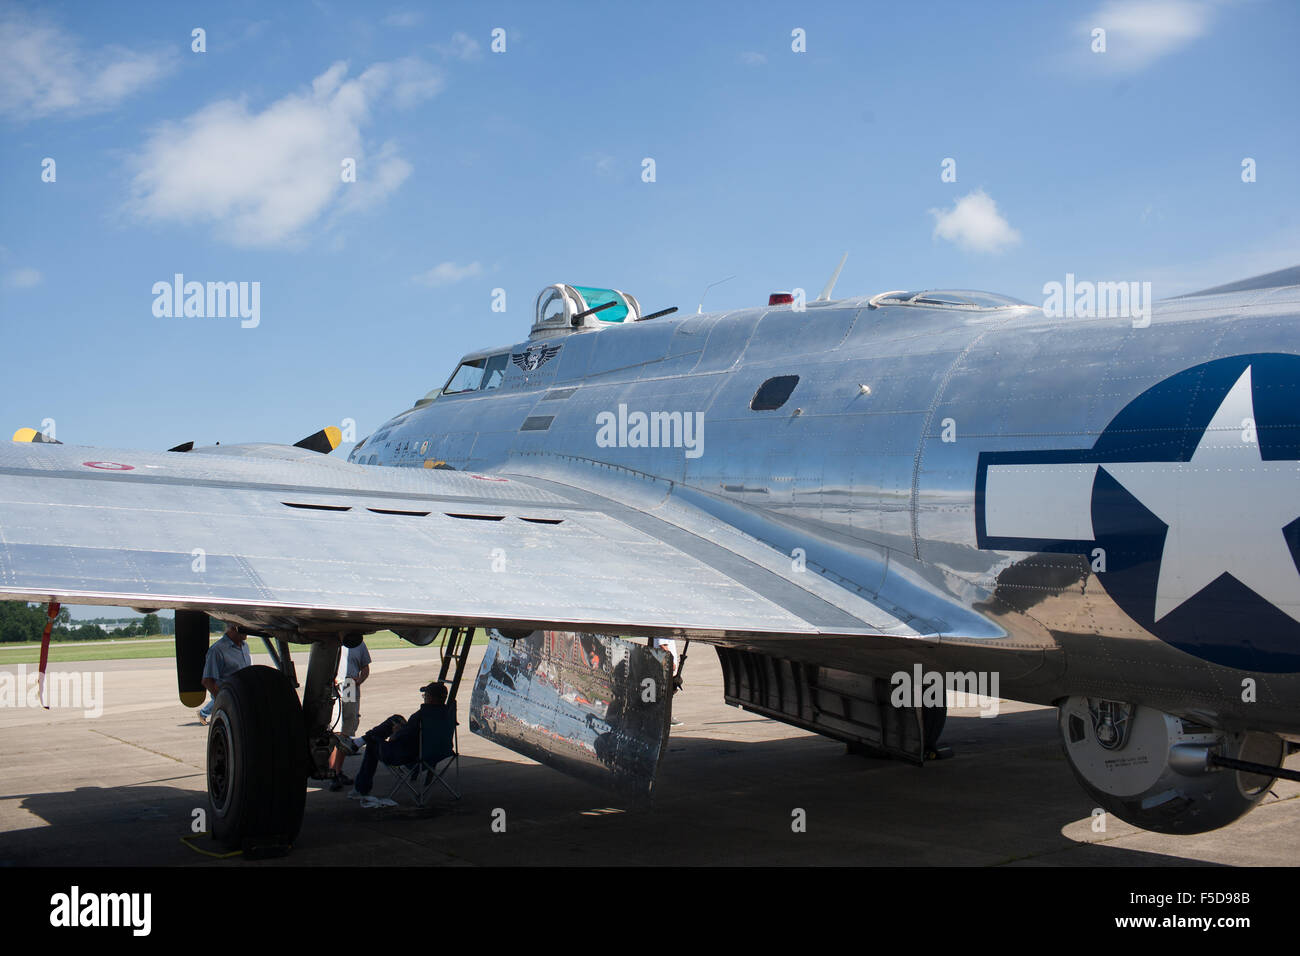 A B-17 Bomber on the Runway Stock Photo